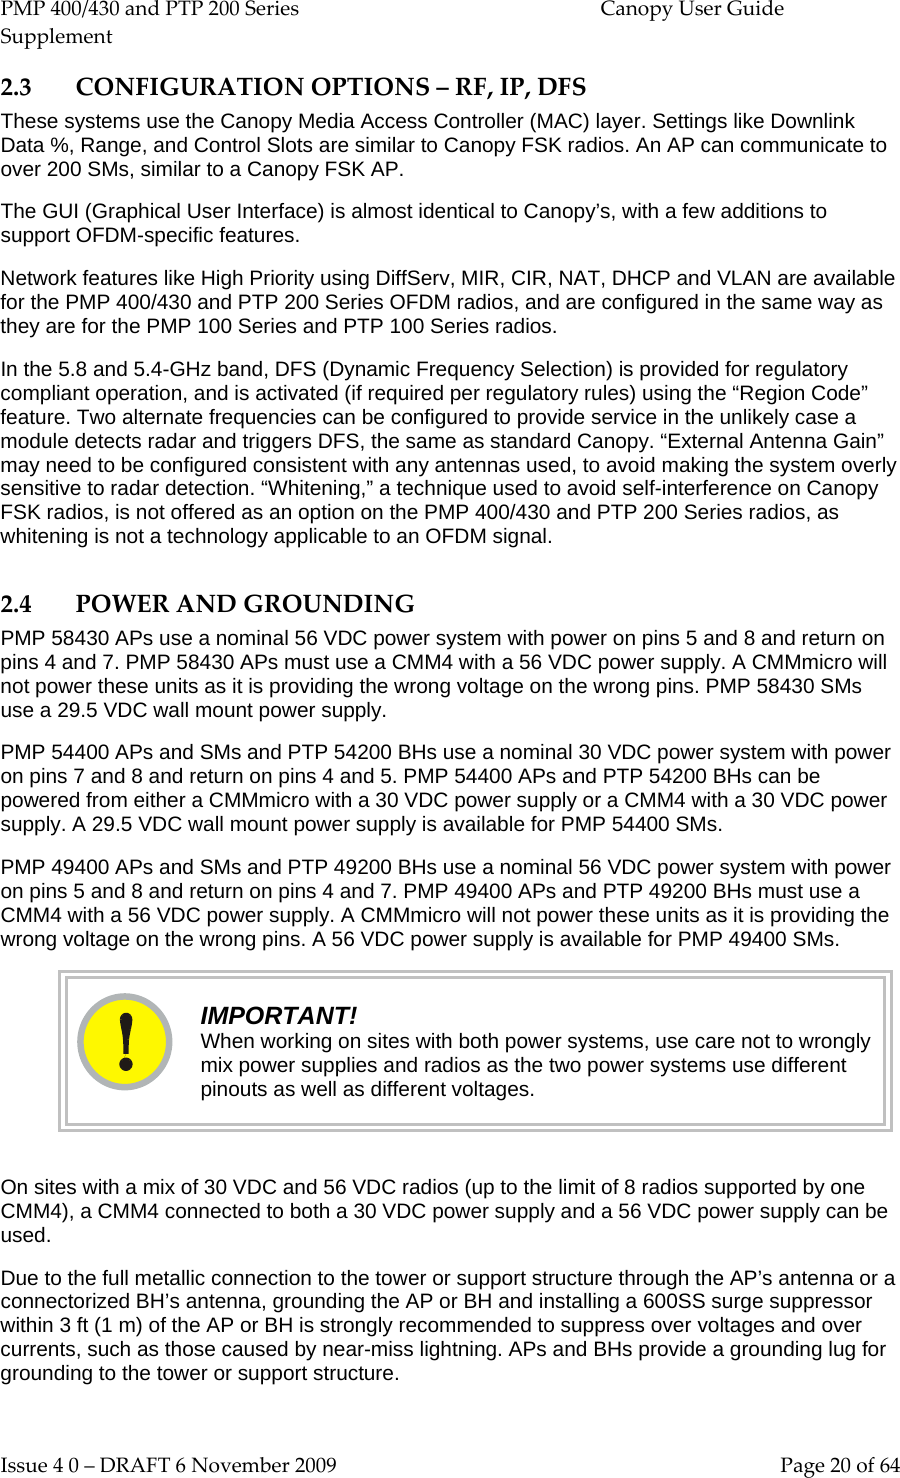 PMP 400/430 and PTP 200 Series  Canopy User Guide Supplement Issue 4 0 – DRAFT 6 November 2009    Page 20 of 64 2.3 CONFIGURATION OPTIONS – RF, IP, DFS These systems use the Canopy Media Access Controller (MAC) layer. Settings like Downlink Data %, Range, and Control Slots are similar to Canopy FSK radios. An AP can communicate to over 200 SMs, similar to a Canopy FSK AP. The GUI (Graphical User Interface) is almost identical to Canopy’s, with a few additions to support OFDM-specific features. Network features like High Priority using DiffServ, MIR, CIR, NAT, DHCP and VLAN are available for the PMP 400/430 and PTP 200 Series OFDM radios, and are configured in the same way as they are for the PMP 100 Series and PTP 100 Series radios. In the 5.8 and 5.4-GHz band, DFS (Dynamic Frequency Selection) is provided for regulatory compliant operation, and is activated (if required per regulatory rules) using the “Region Code” feature. Two alternate frequencies can be configured to provide service in the unlikely case a module detects radar and triggers DFS, the same as standard Canopy. “External Antenna Gain” may need to be configured consistent with any antennas used, to avoid making the system overly sensitive to radar detection. “Whitening,” a technique used to avoid self-interference on Canopy FSK radios, is not offered as an option on the PMP 400/430 and PTP 200 Series radios, as whitening is not a technology applicable to an OFDM signal. 2.4 POWER AND GROUNDING PMP 58430 APs use a nominal 56 VDC power system with power on pins 5 and 8 and return on pins 4 and 7. PMP 58430 APs must use a CMM4 with a 56 VDC power supply. A CMMmicro will not power these units as it is providing the wrong voltage on the wrong pins. PMP 58430 SMs use a 29.5 VDC wall mount power supply. PMP 54400 APs and SMs and PTP 54200 BHs use a nominal 30 VDC power system with power on pins 7 and 8 and return on pins 4 and 5. PMP 54400 APs and PTP 54200 BHs can be powered from either a CMMmicro with a 30 VDC power supply or a CMM4 with a 30 VDC power supply. A 29.5 VDC wall mount power supply is available for PMP 54400 SMs. PMP 49400 APs and SMs and PTP 49200 BHs use a nominal 56 VDC power system with power on pins 5 and 8 and return on pins 4 and 7. PMP 49400 APs and PTP 49200 BHs must use a CMM4 with a 56 VDC power supply. A CMMmicro will not power these units as it is providing the wrong voltage on the wrong pins. A 56 VDC power supply is available for PMP 49400 SMs.  IMPORTANT! When working on sites with both power systems, use care not to wrongly mix power supplies and radios as the two power systems use different pinouts as well as different voltages.  On sites with a mix of 30 VDC and 56 VDC radios (up to the limit of 8 radios supported by one CMM4), a CMM4 connected to both a 30 VDC power supply and a 56 VDC power supply can be used. Due to the full metallic connection to the tower or support structure through the AP’s antenna or a connectorized BH’s antenna, grounding the AP or BH and installing a 600SS surge suppressor within 3 ft (1 m) of the AP or BH is strongly recommended to suppress over voltages and over currents, such as those caused by near-miss lightning. APs and BHs provide a grounding lug for grounding to the tower or support structure.  